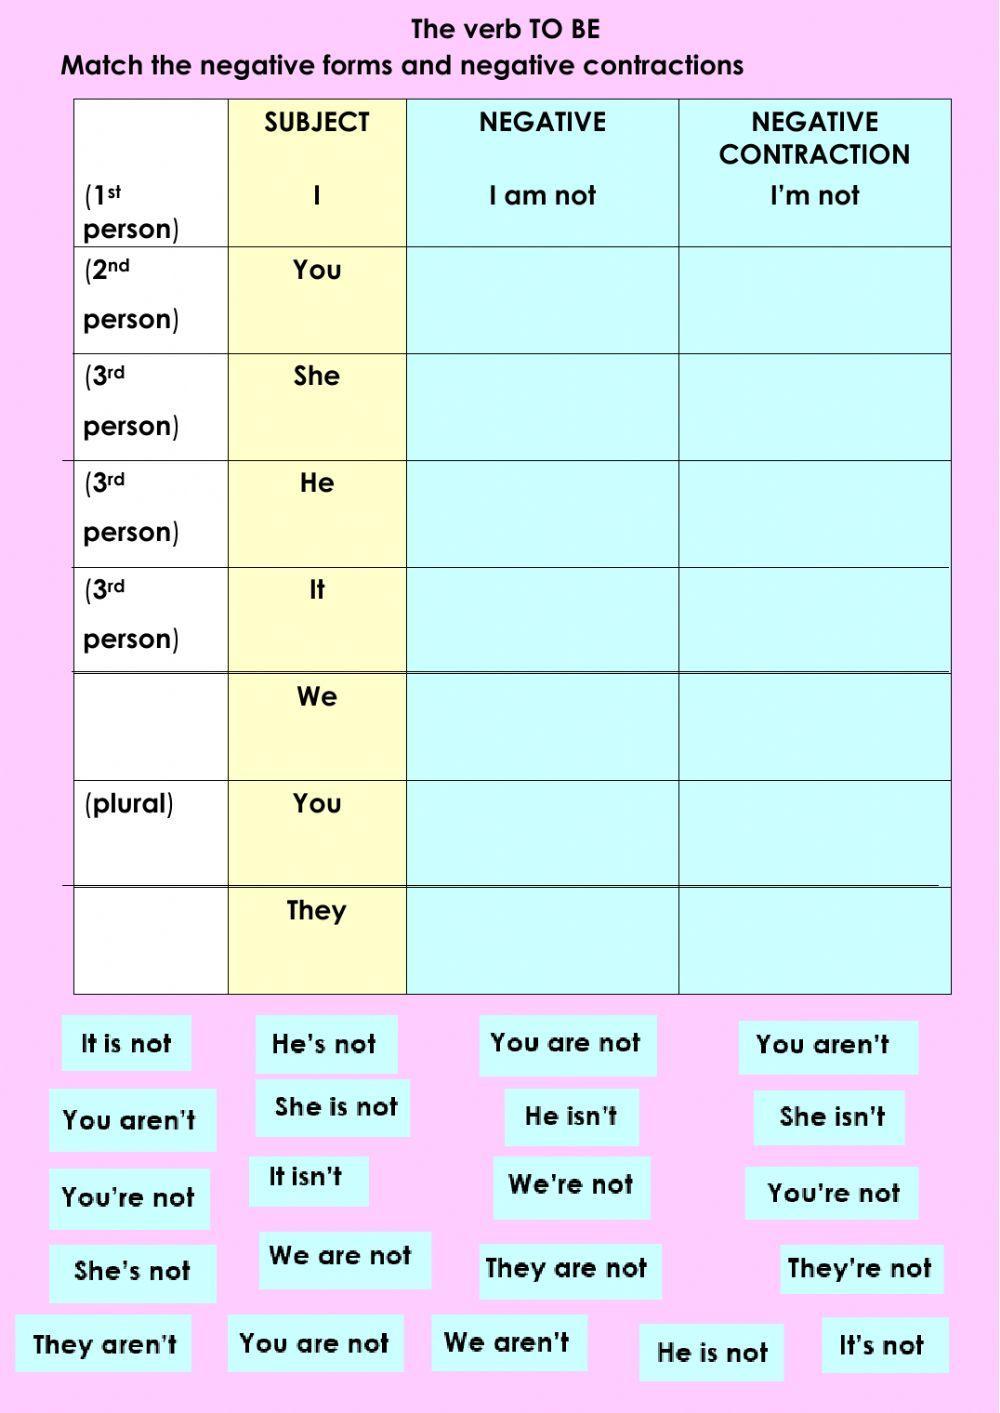 The verb to be and negative contractions